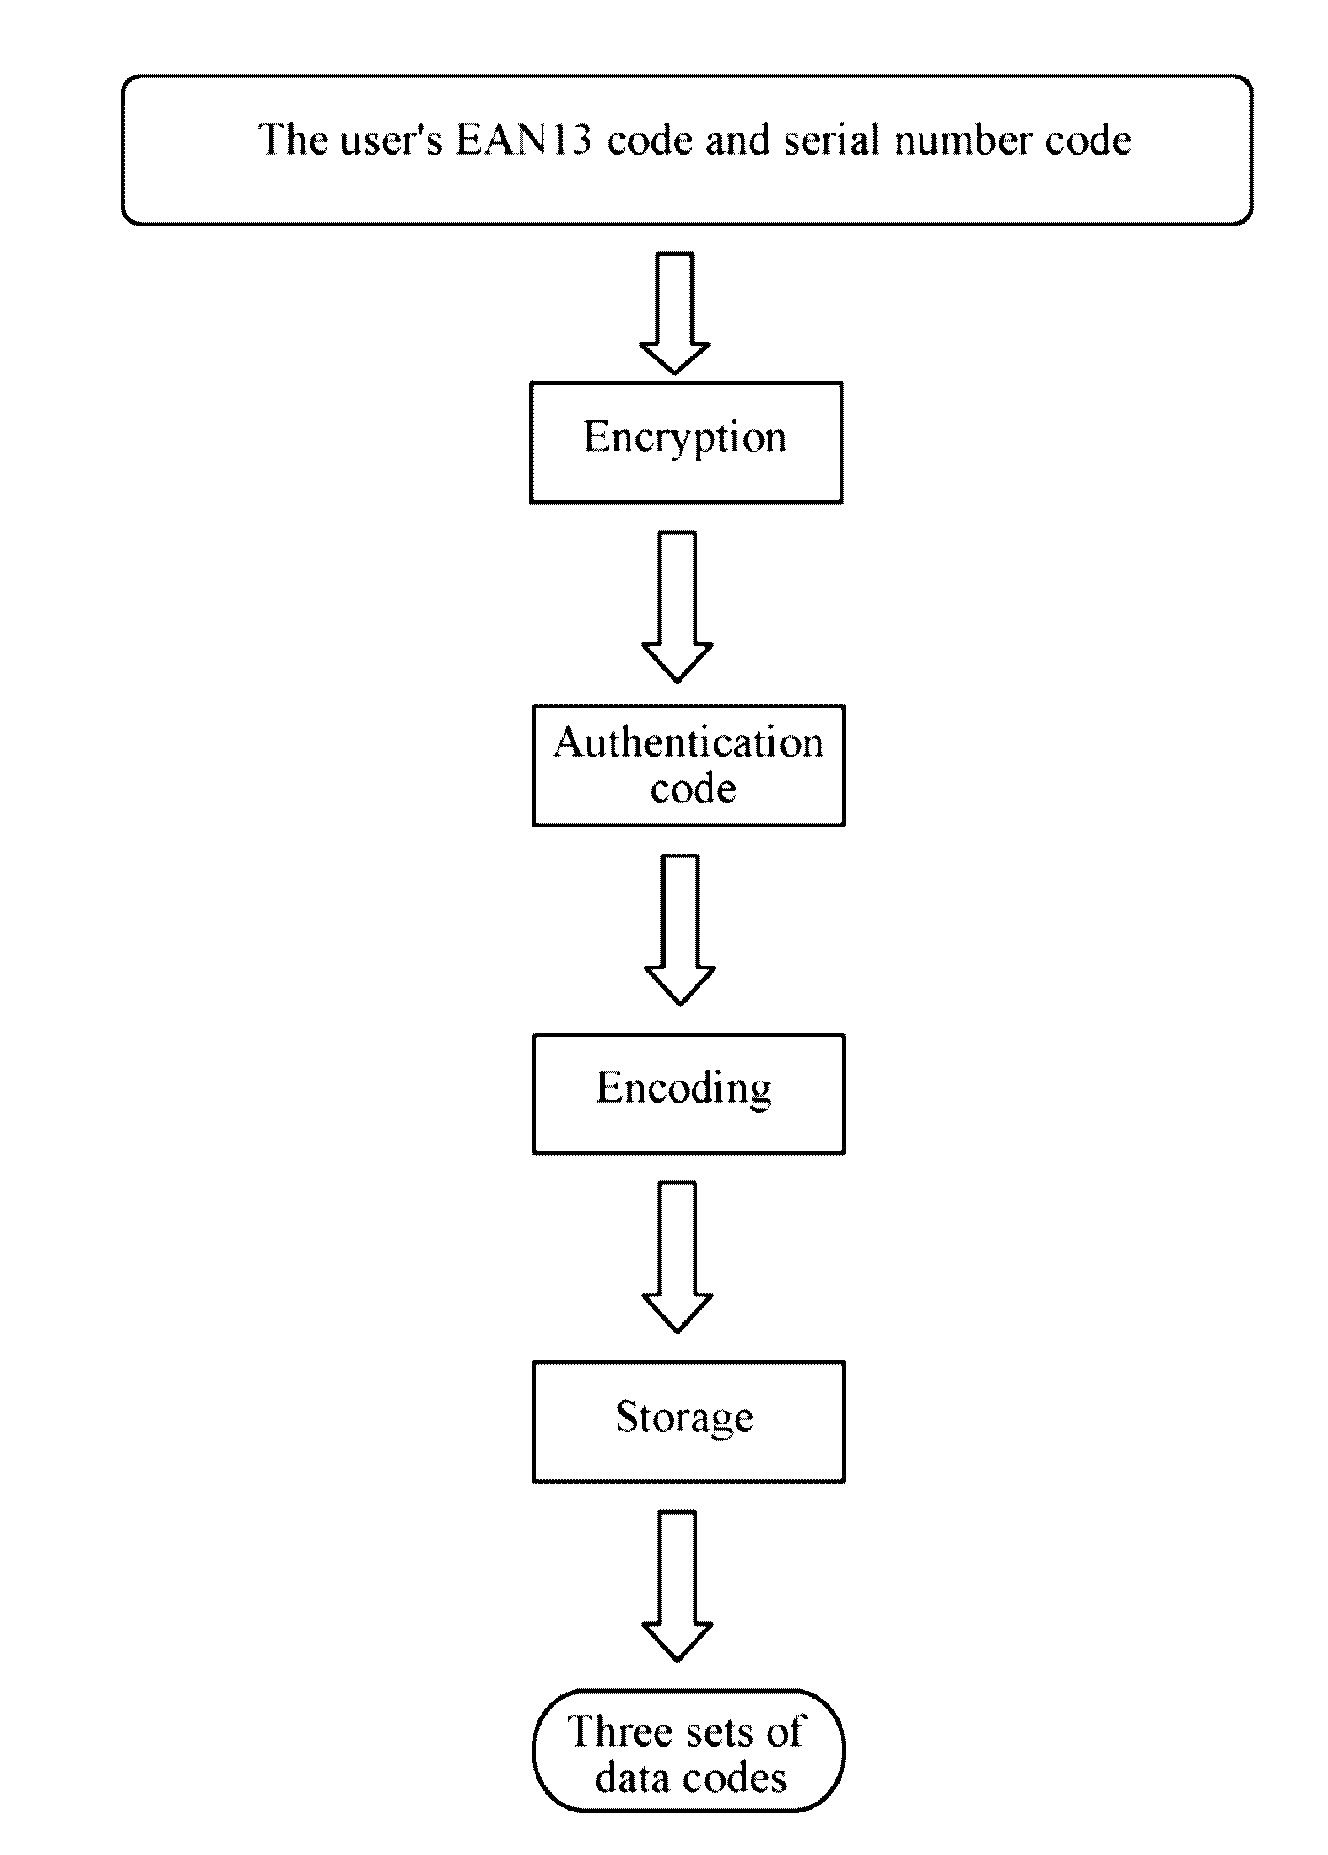 System architecture and method for guaranteeing network information security